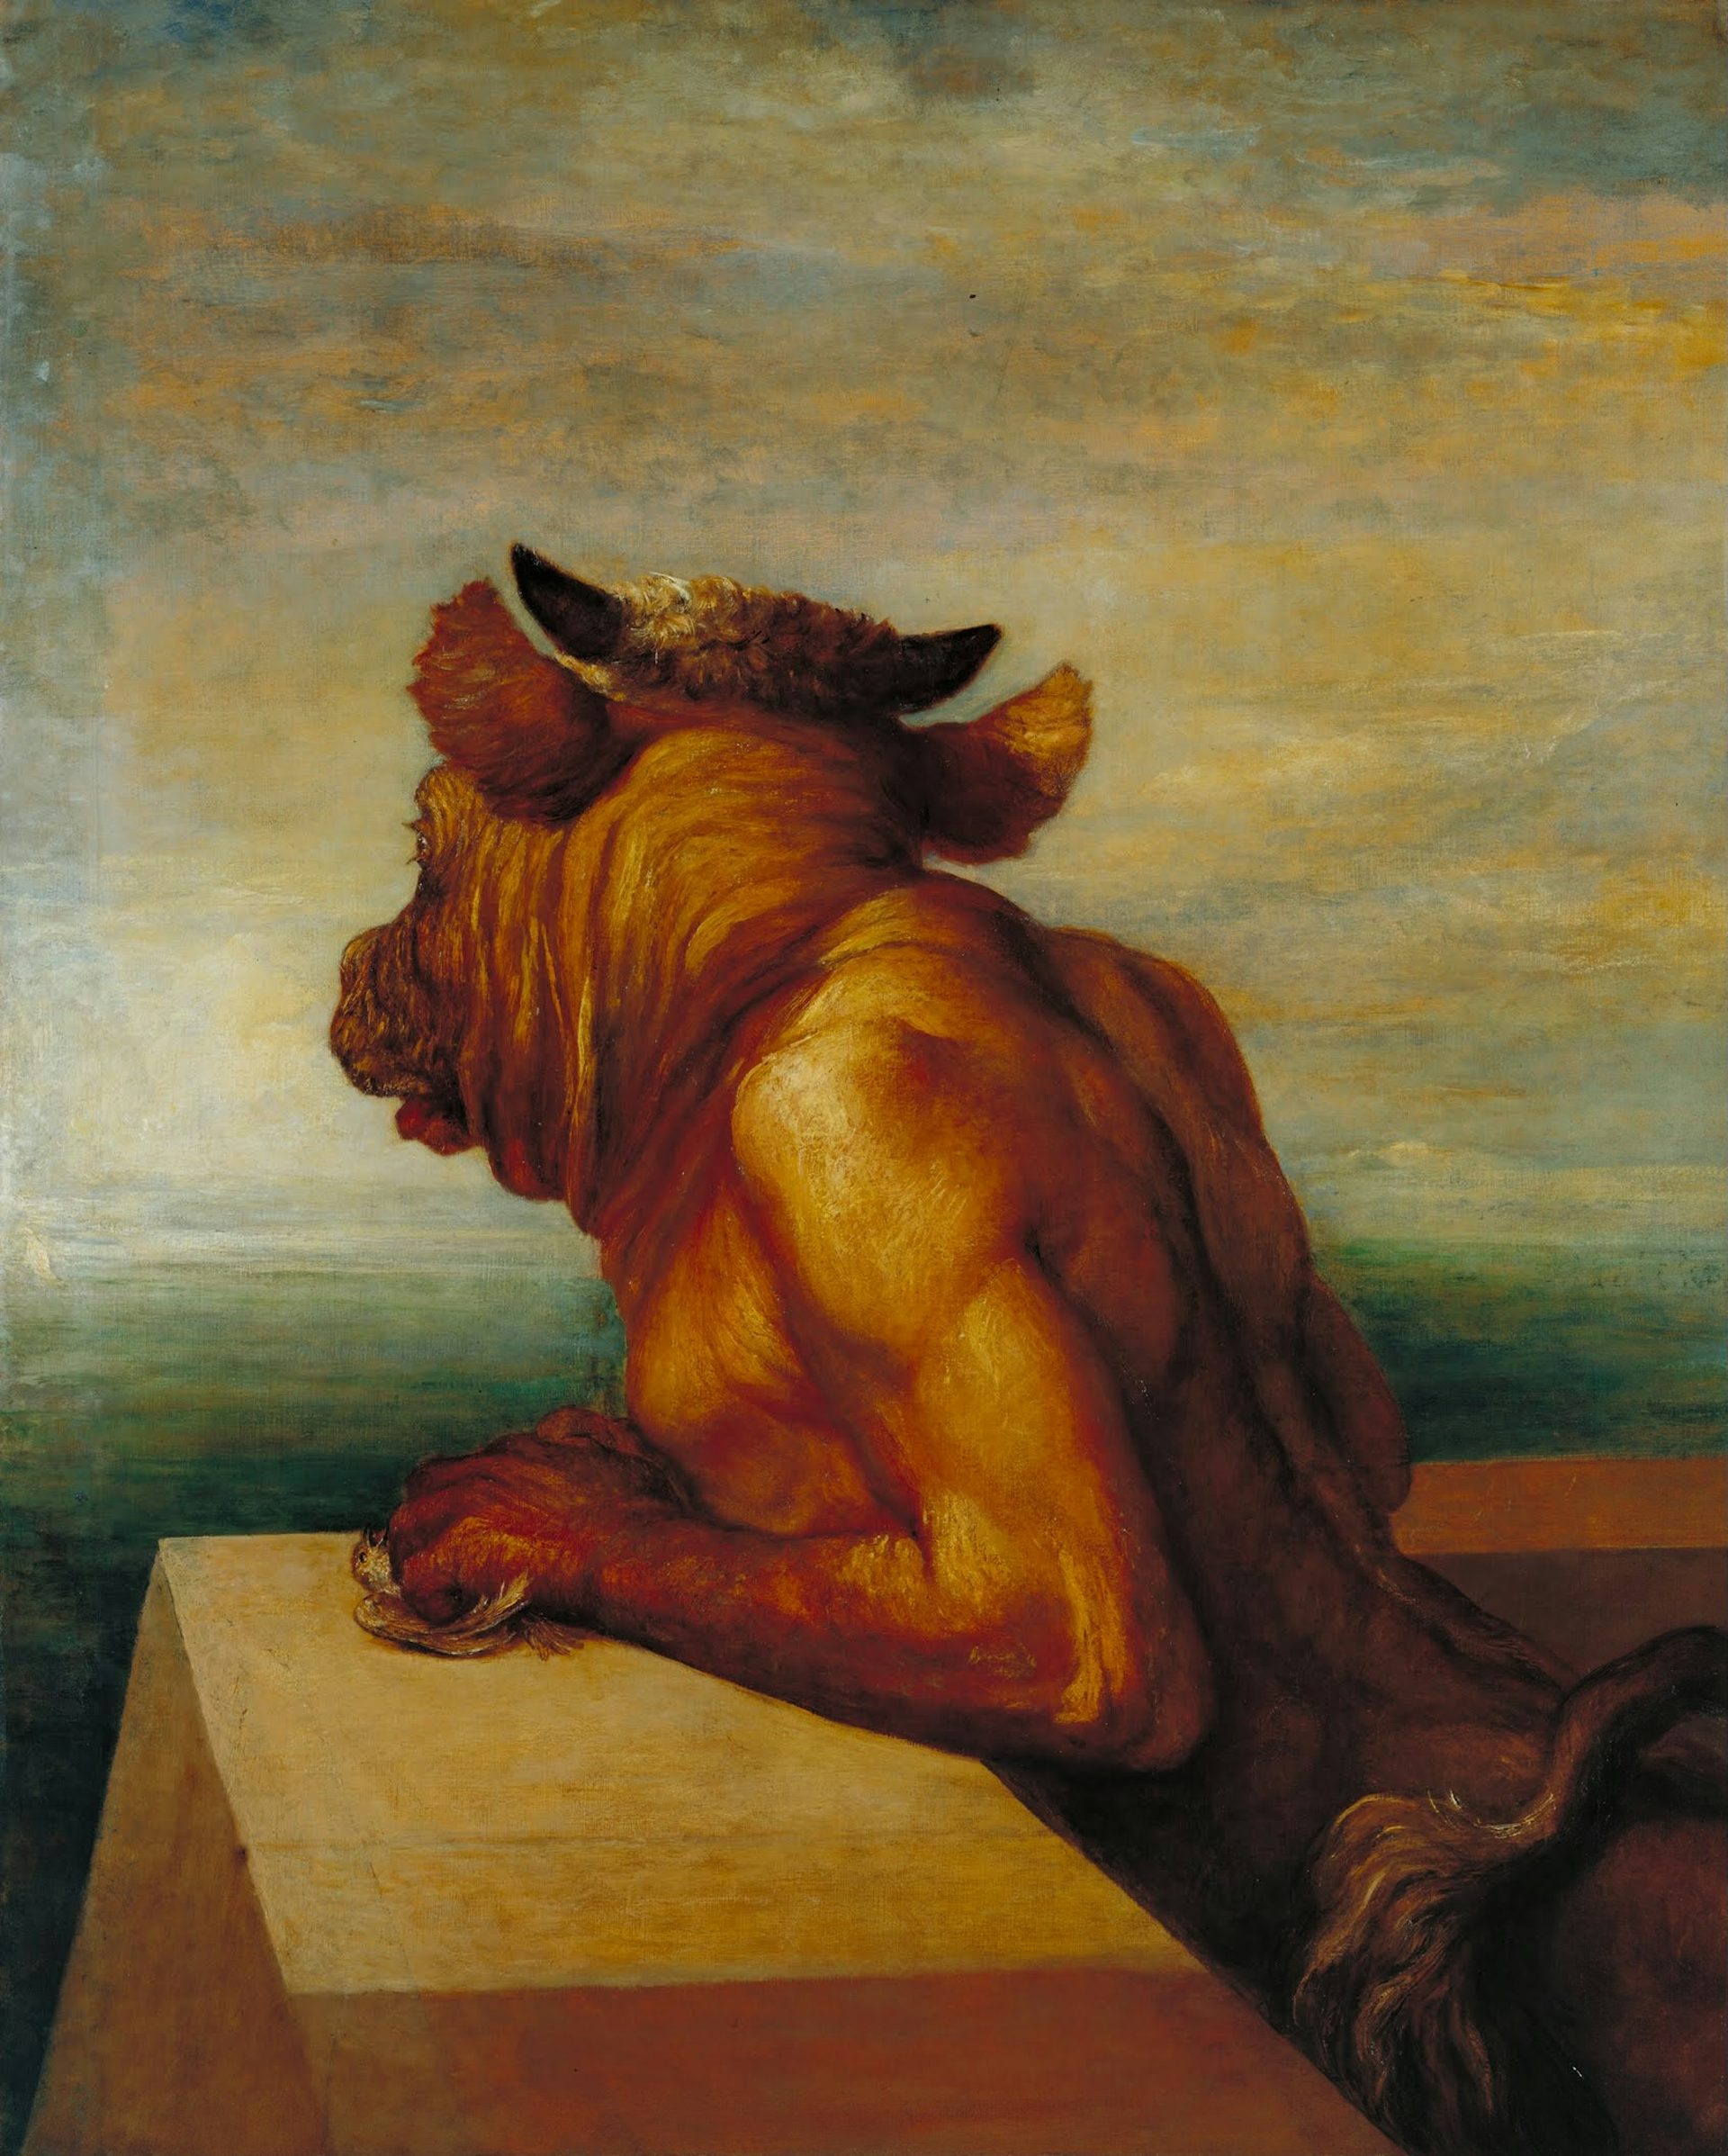 The Minotaur by George Frederic Watts (1885)